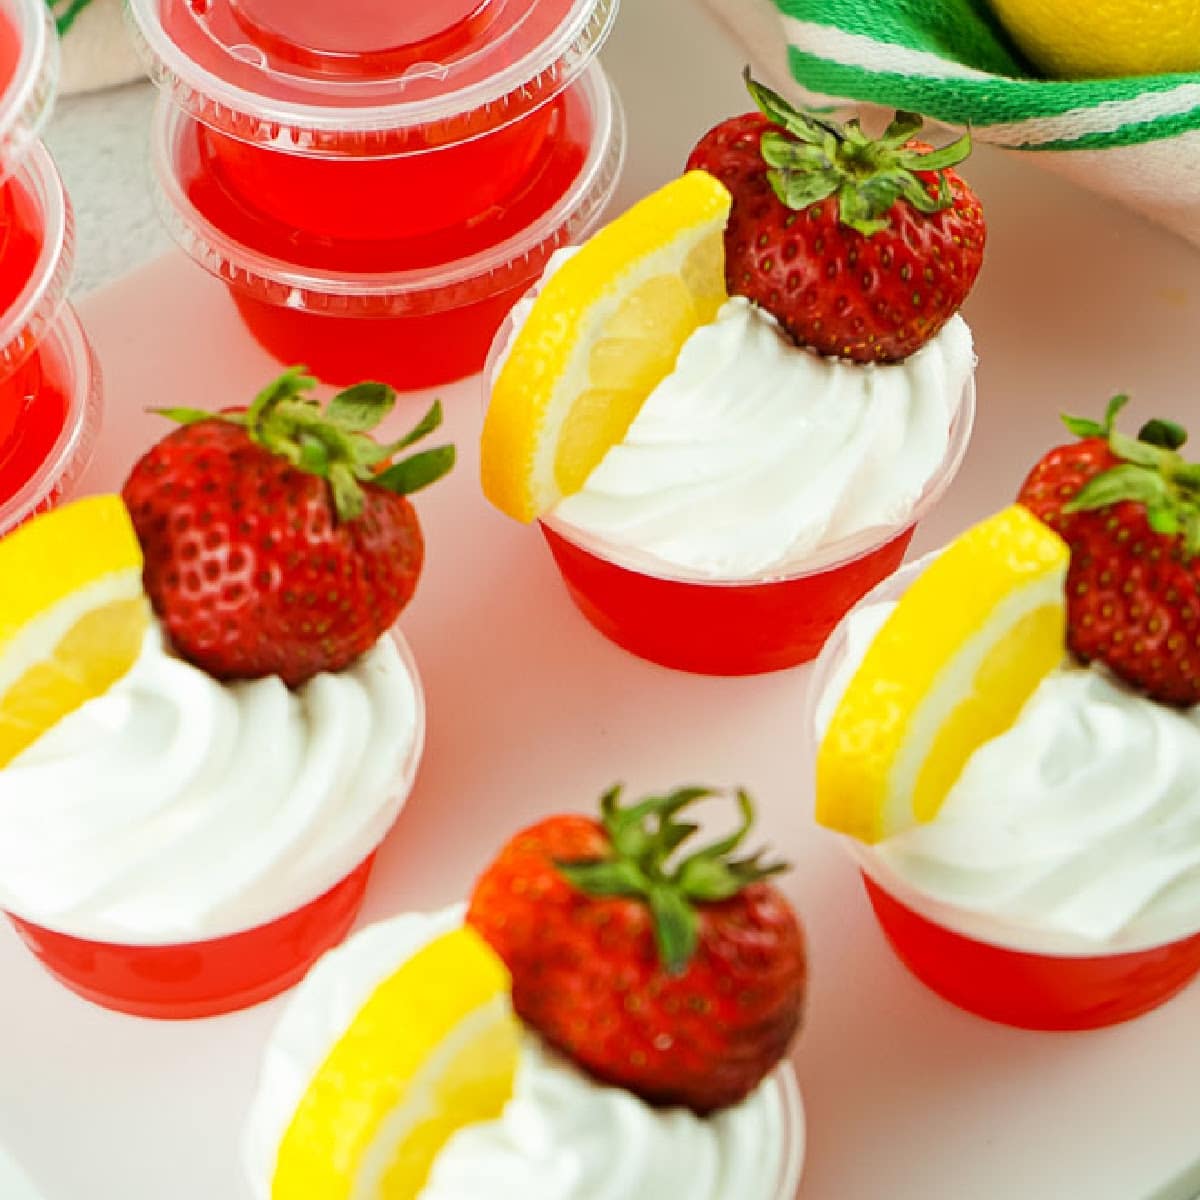 Overhead view of four Strawberry Lemonade Jello Shots with whipped cream, lemon slices, and strawberry.